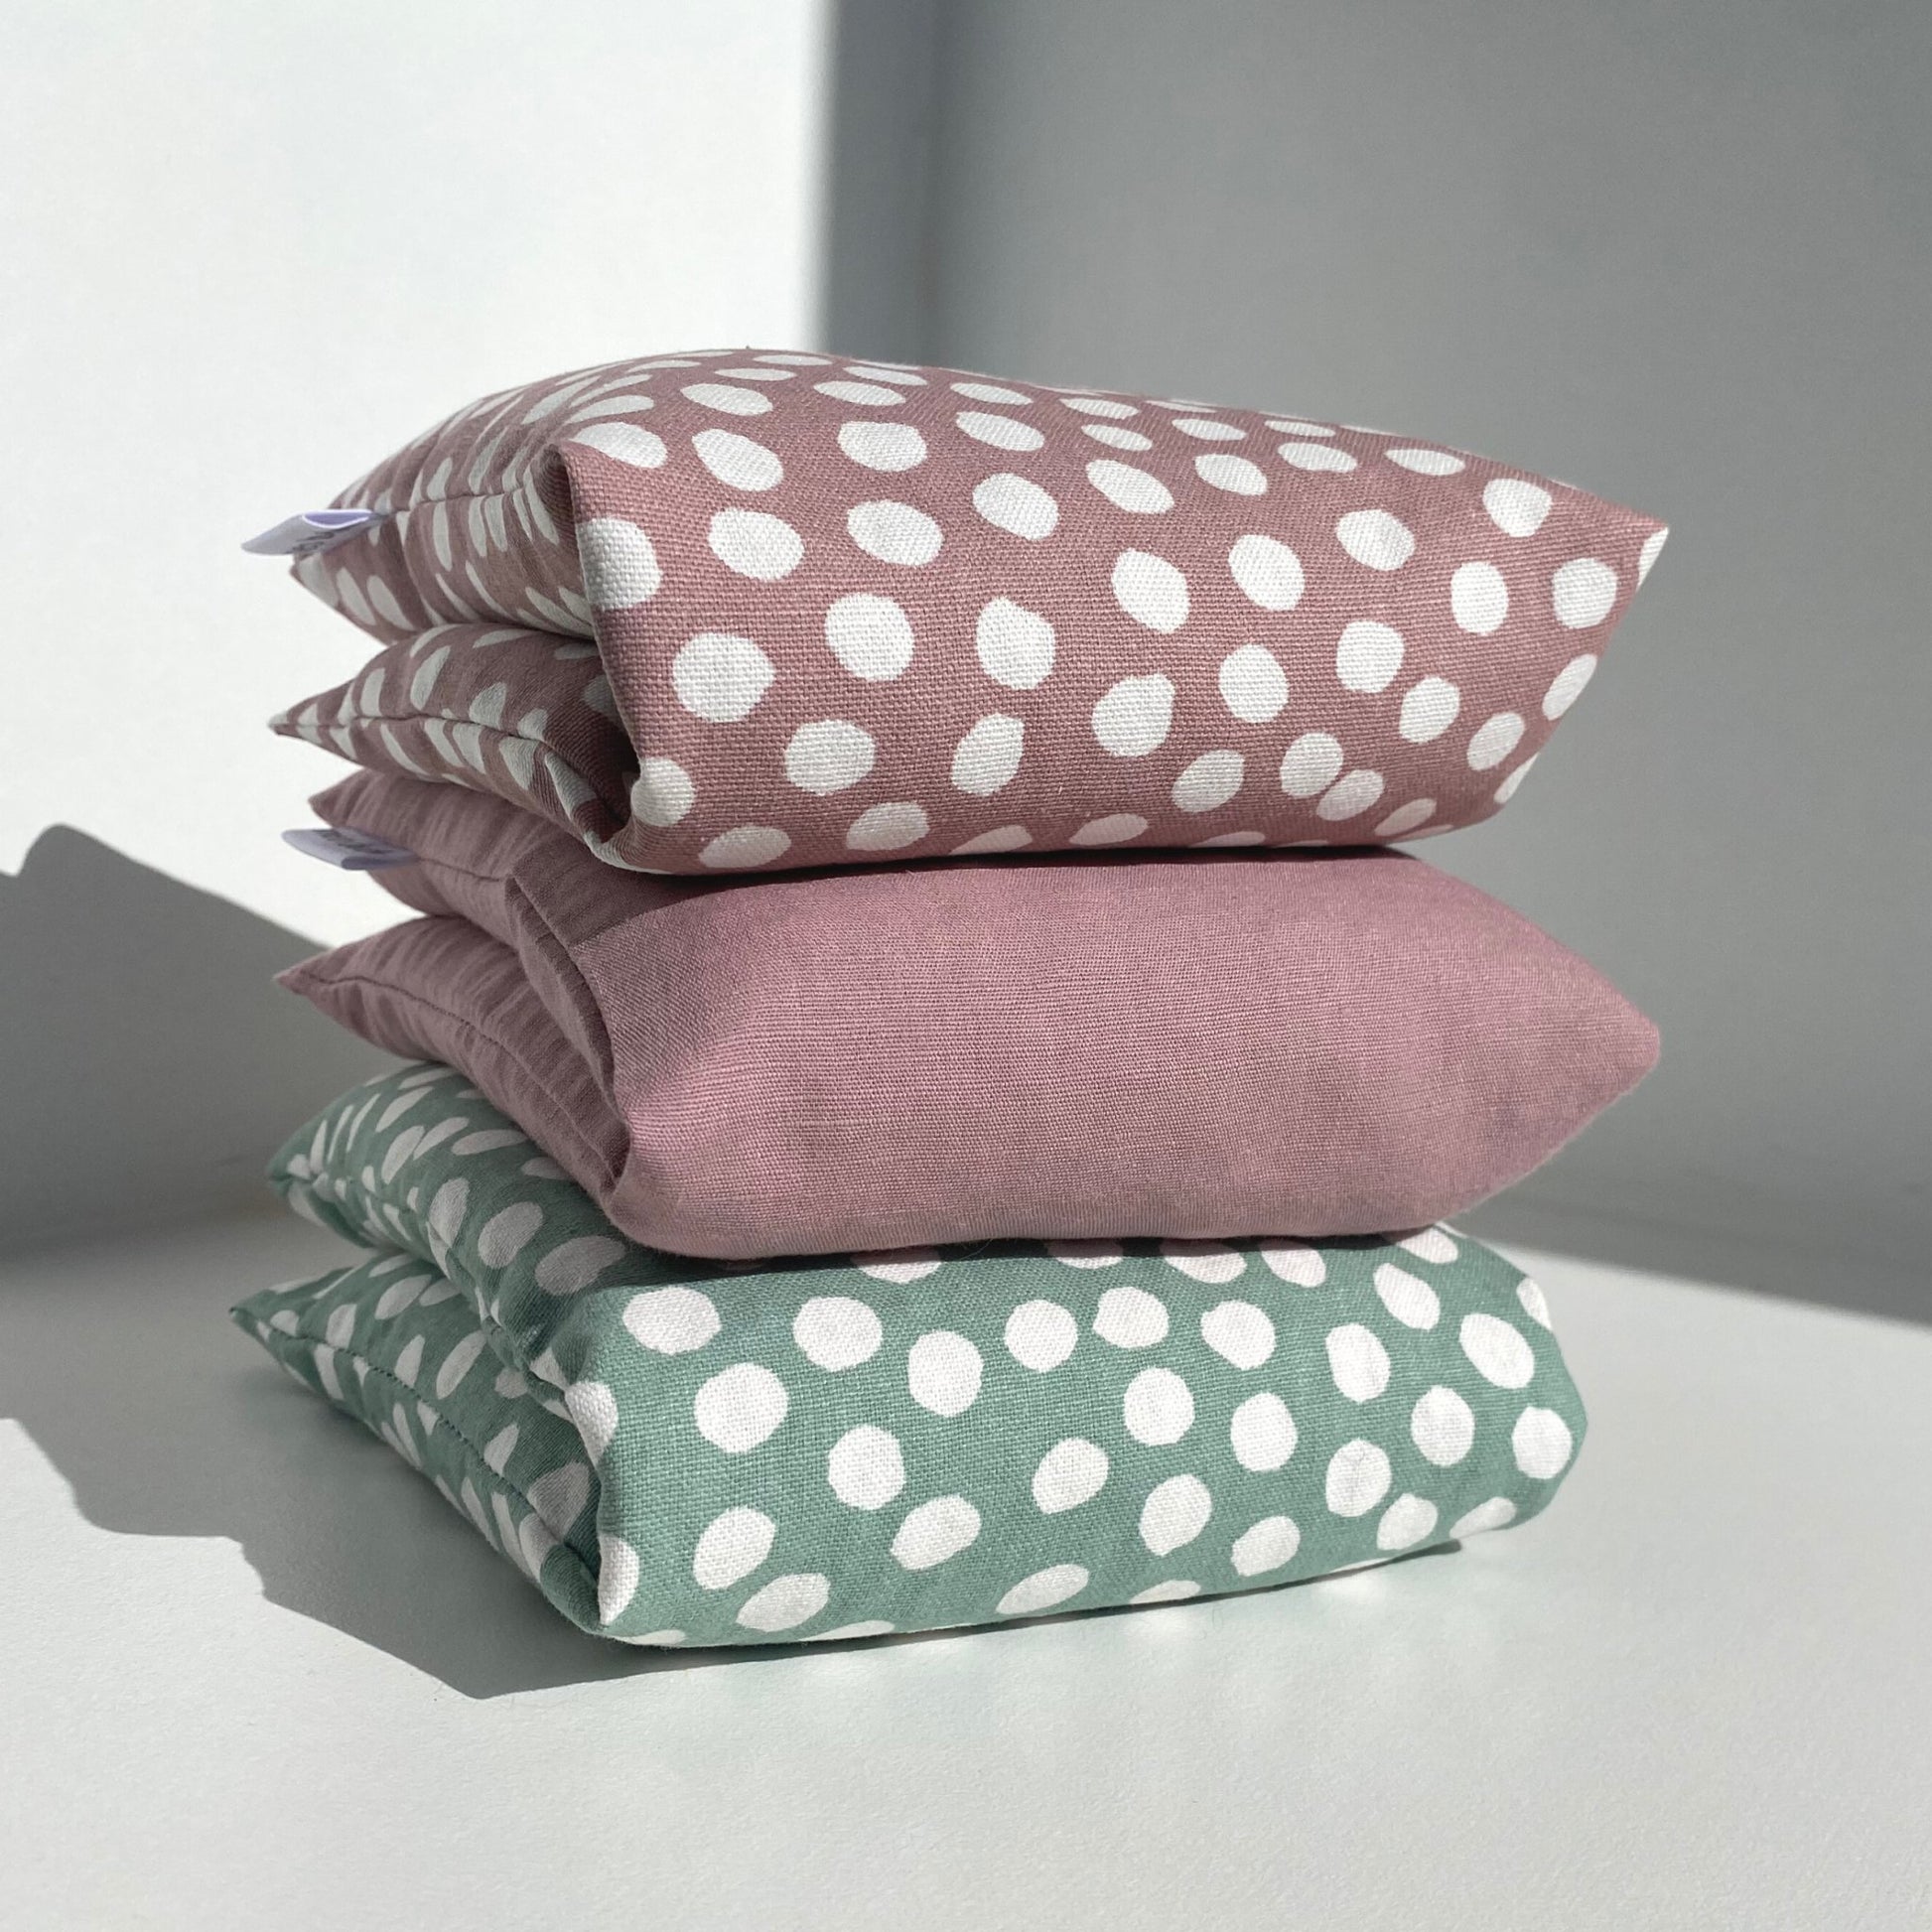 Stack of 3 heat packs (Top 'pink polka dot', middle 'pink' and bottom 'green polkadot'- Meo Body